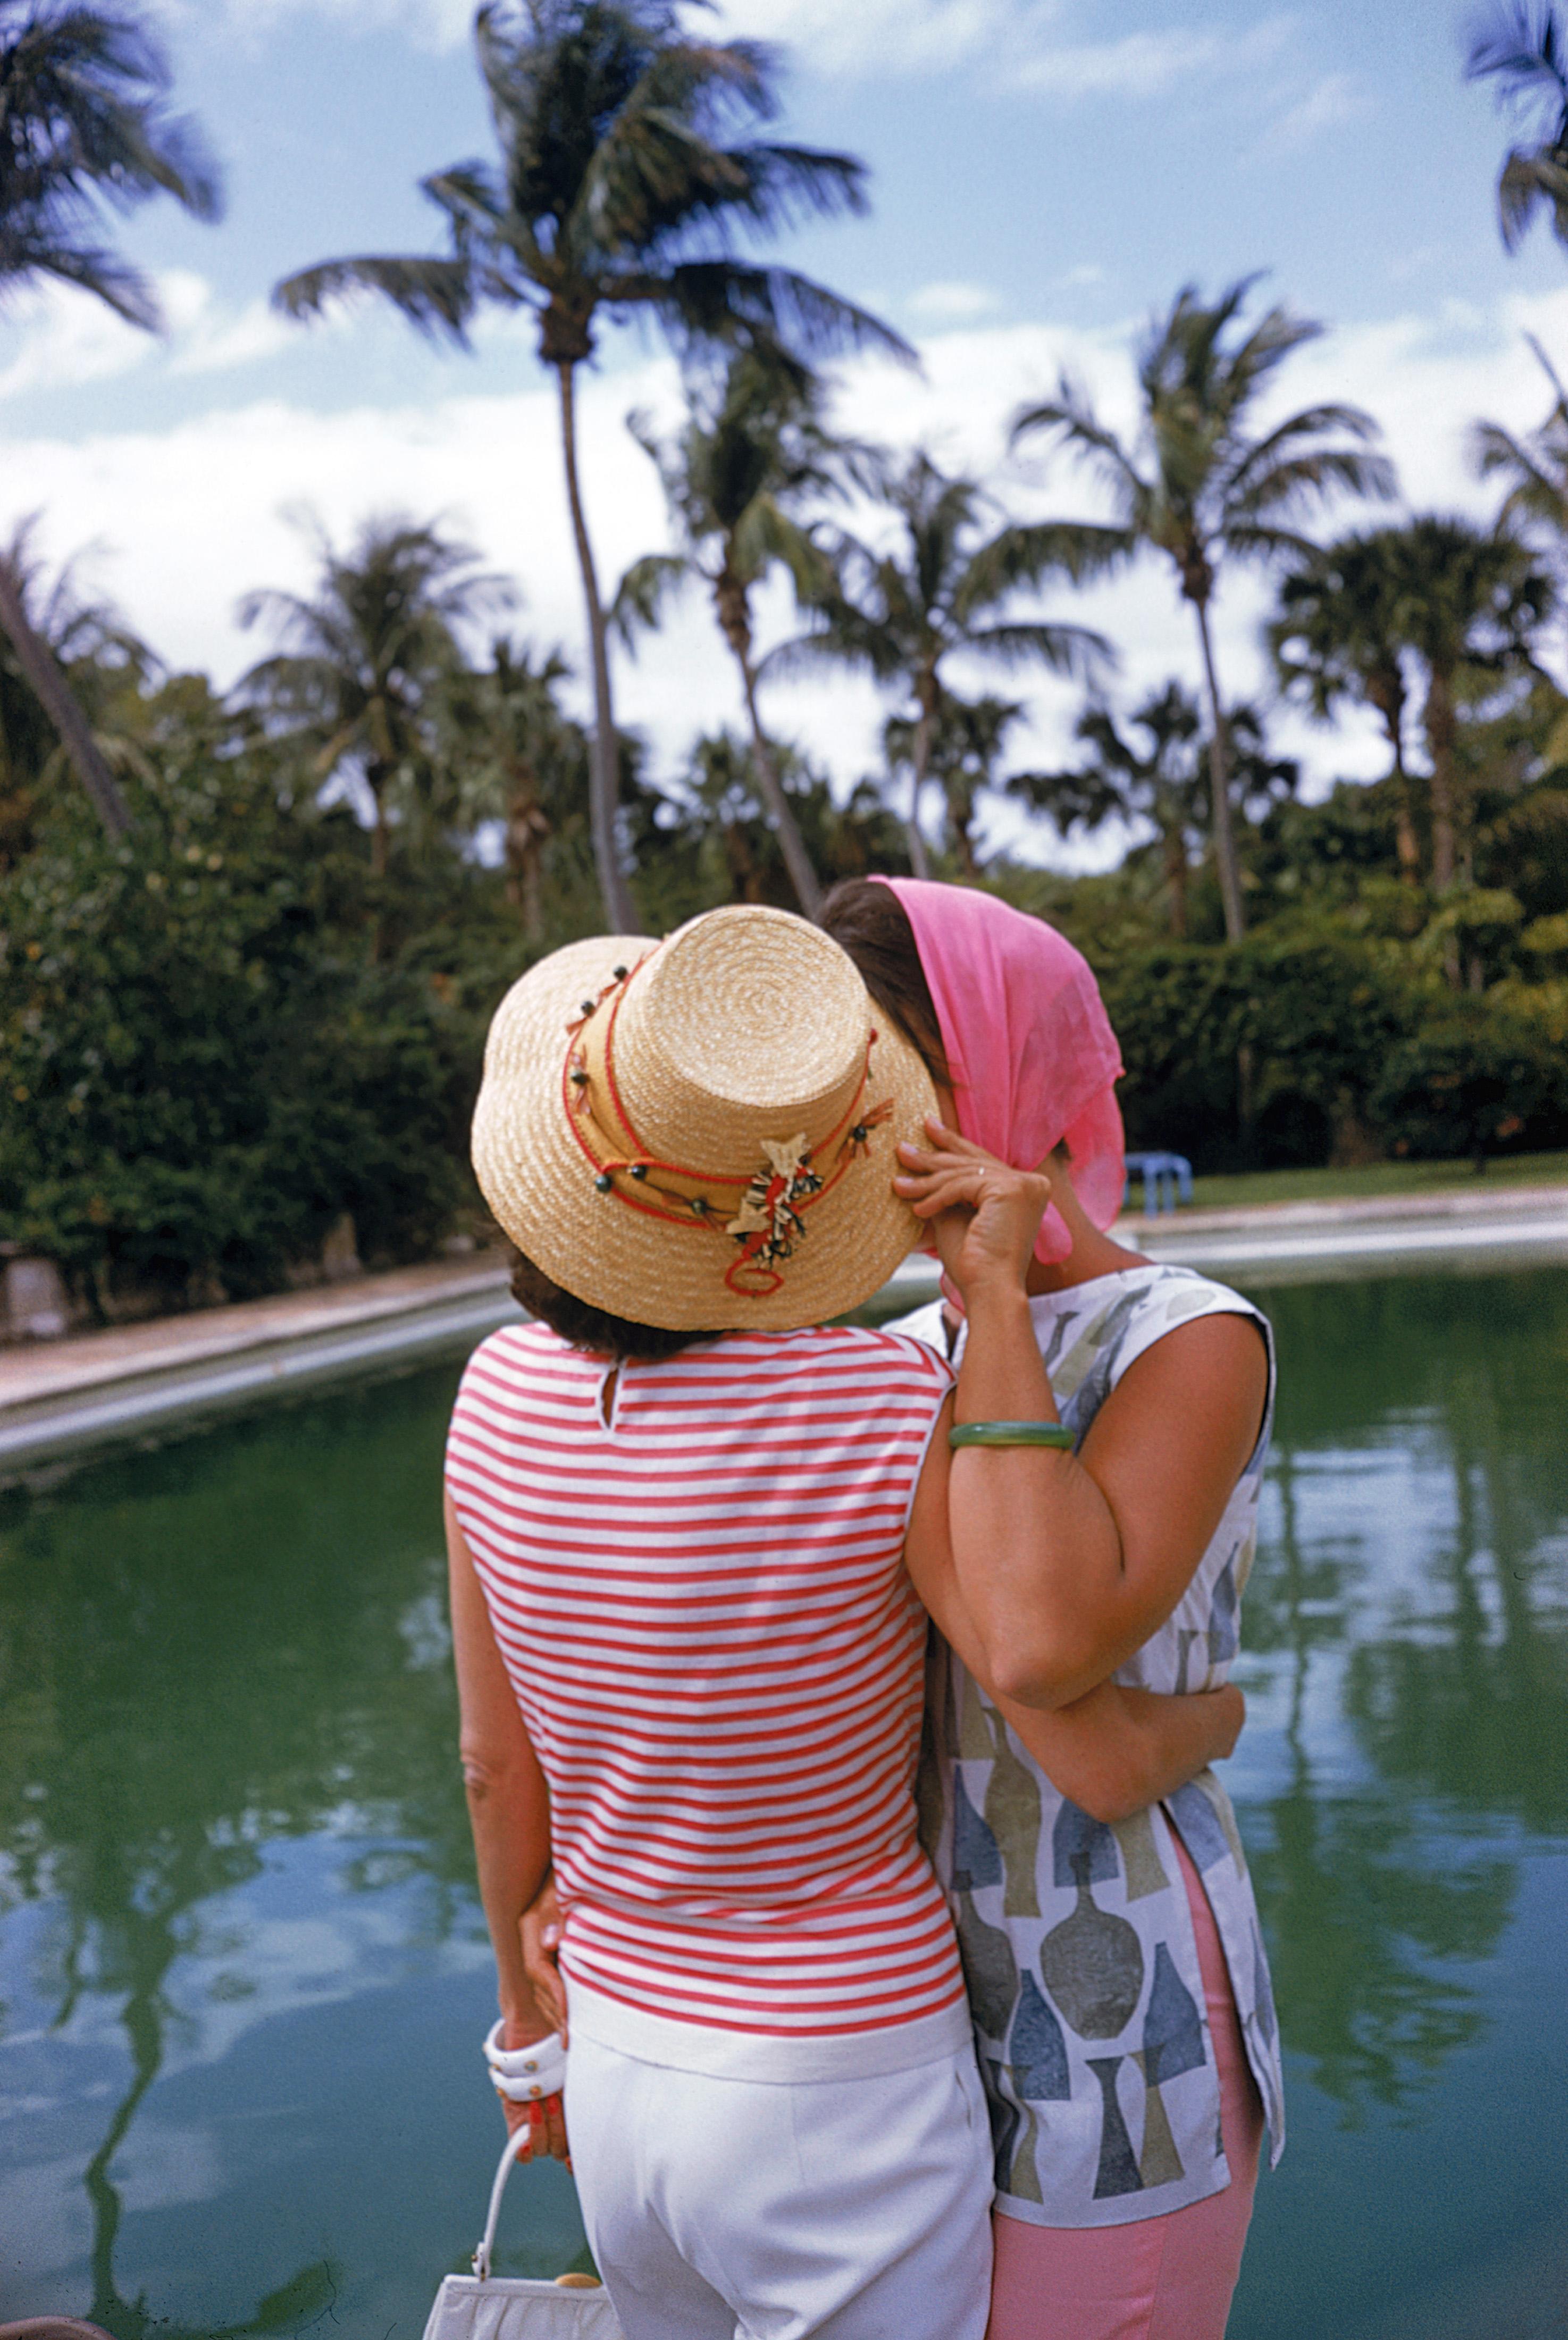 Flo Smith (left) and Lily Pulitzer share a secret at a pool party, Palm Beach, Florida, April 1961.

Description and alt text: In this classic image of midcentury poolside glamour, two suntanned white women share a moment by the sparkling blue and